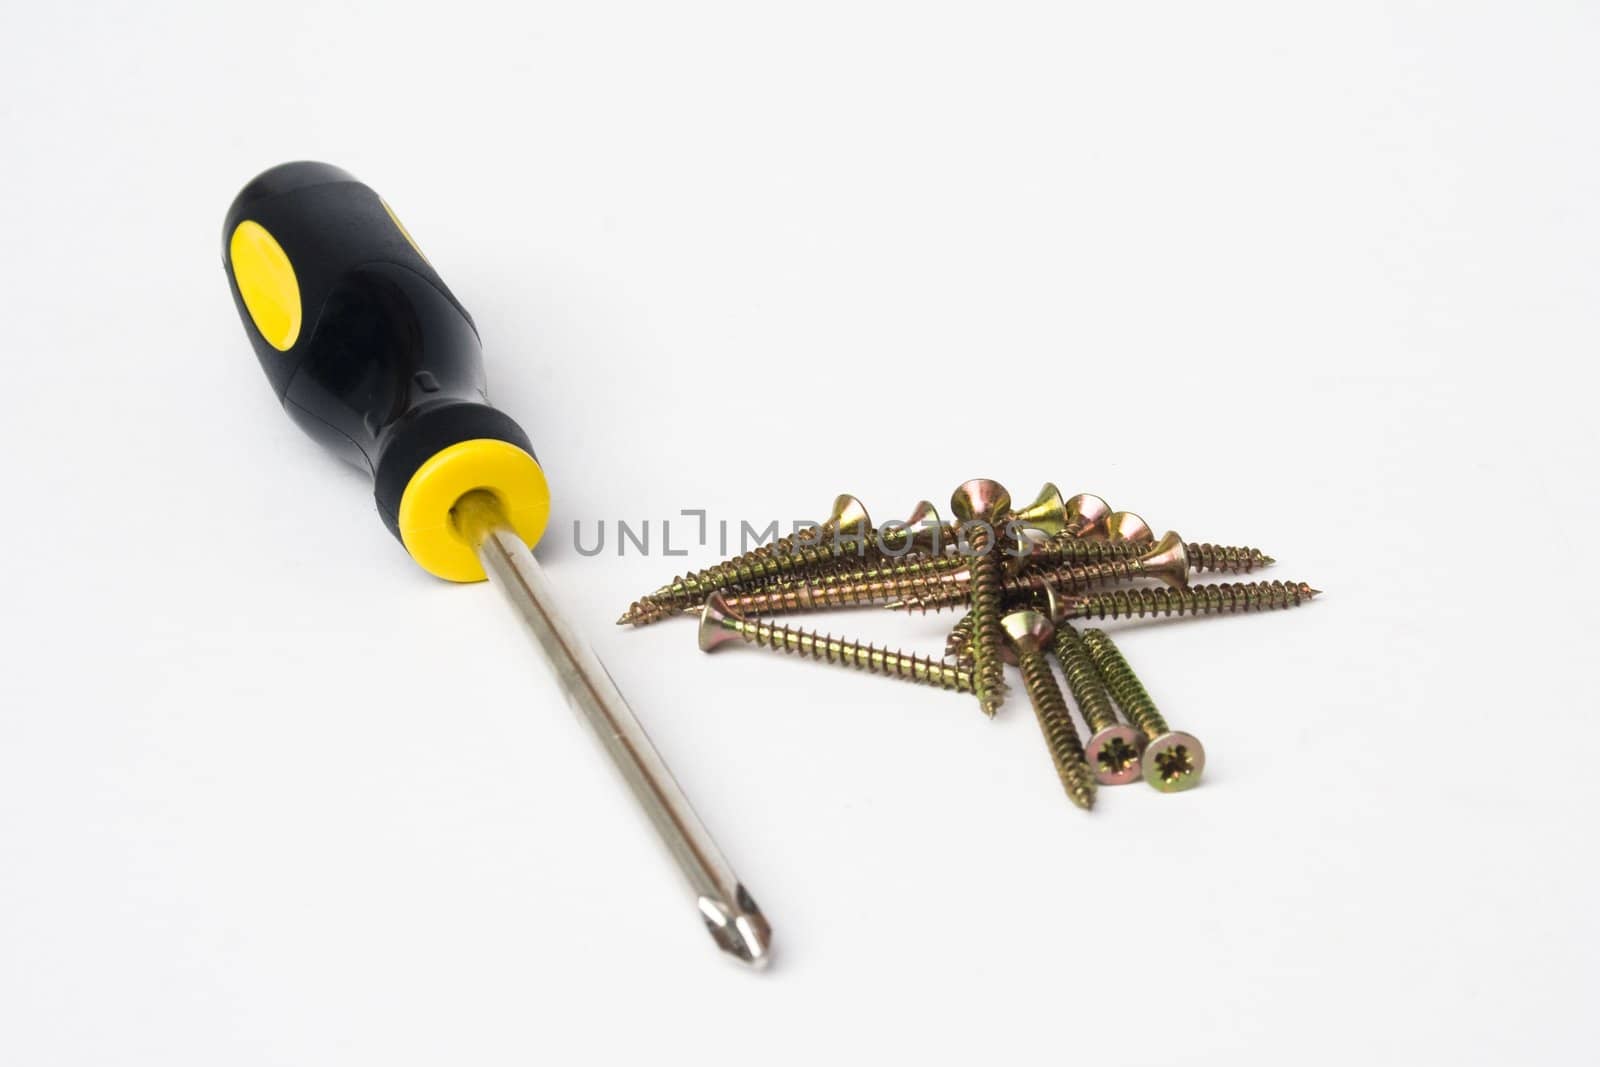 Yellow and black handled phillips screwdriver with pile of scews on white background